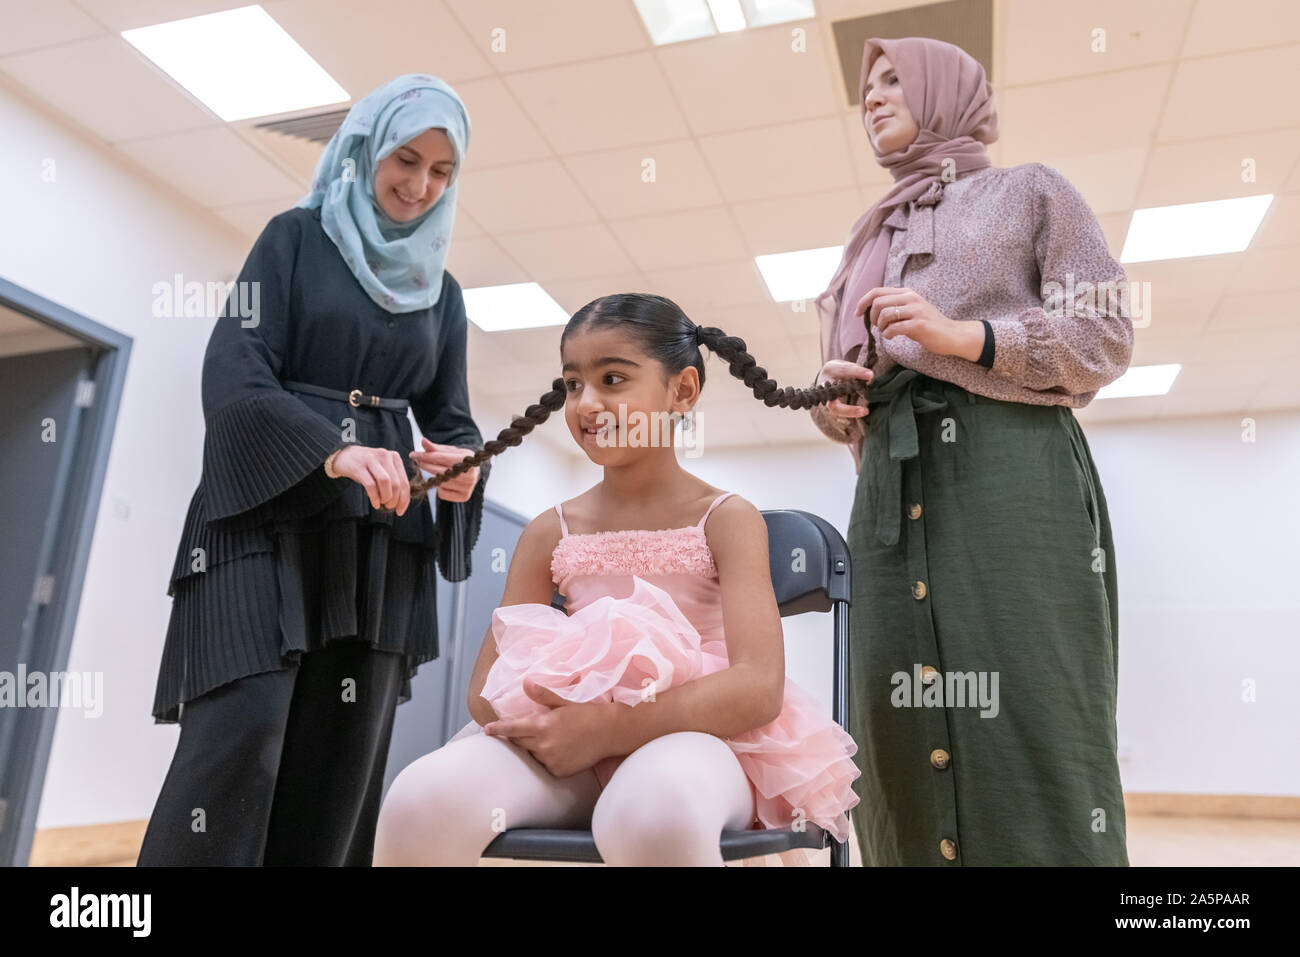 London, UK. 22nd Oct, 2019. World Ballet Day: Muslim Ballet School. Grace & Poise Academy. Founded in Jan 2019 by Maisie Alexandra Byers(pictured right), a graduate of the Royal Academy of Dance and Dr Sajedah Shabib(pictured left), business director, Grace & Poise Academy is the world’s first ballet school bringing ballet to the Muslim community.  Young dancer pictured: Halimah 4 yrs in chair. Credit: Guy Corbishley/Alamy Live News Stock Photo